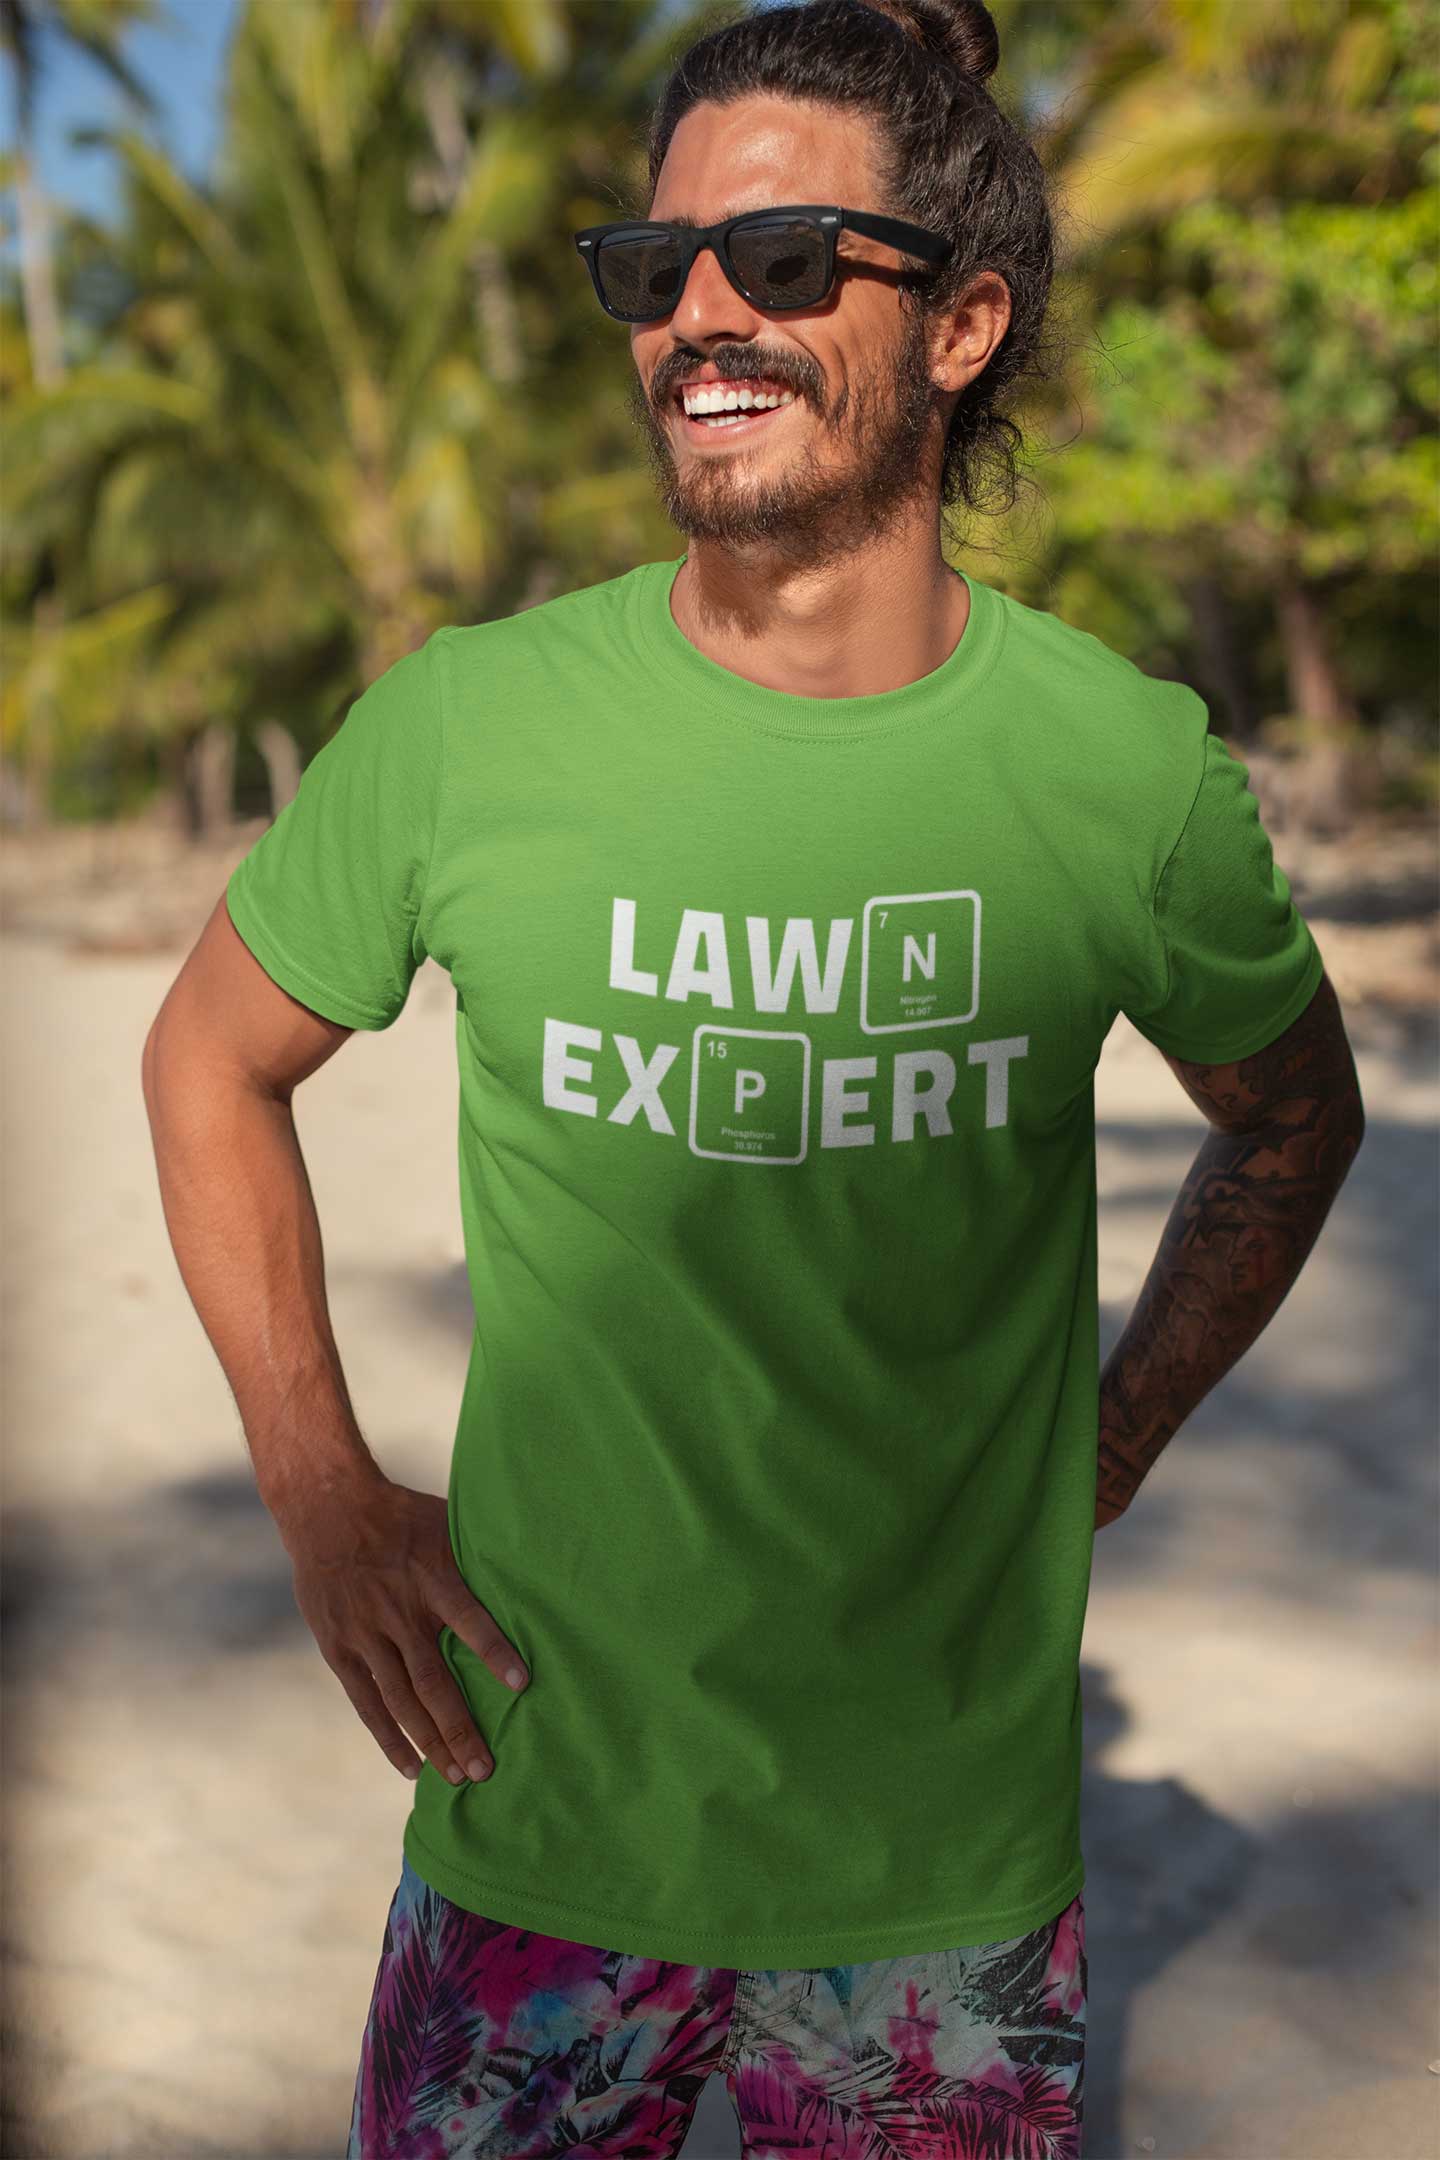 Are you a lawn expert in all things lawn chemistry? Show your pride of yard mastery with our Landscaper Apparel Lawn Expert T-Shirt